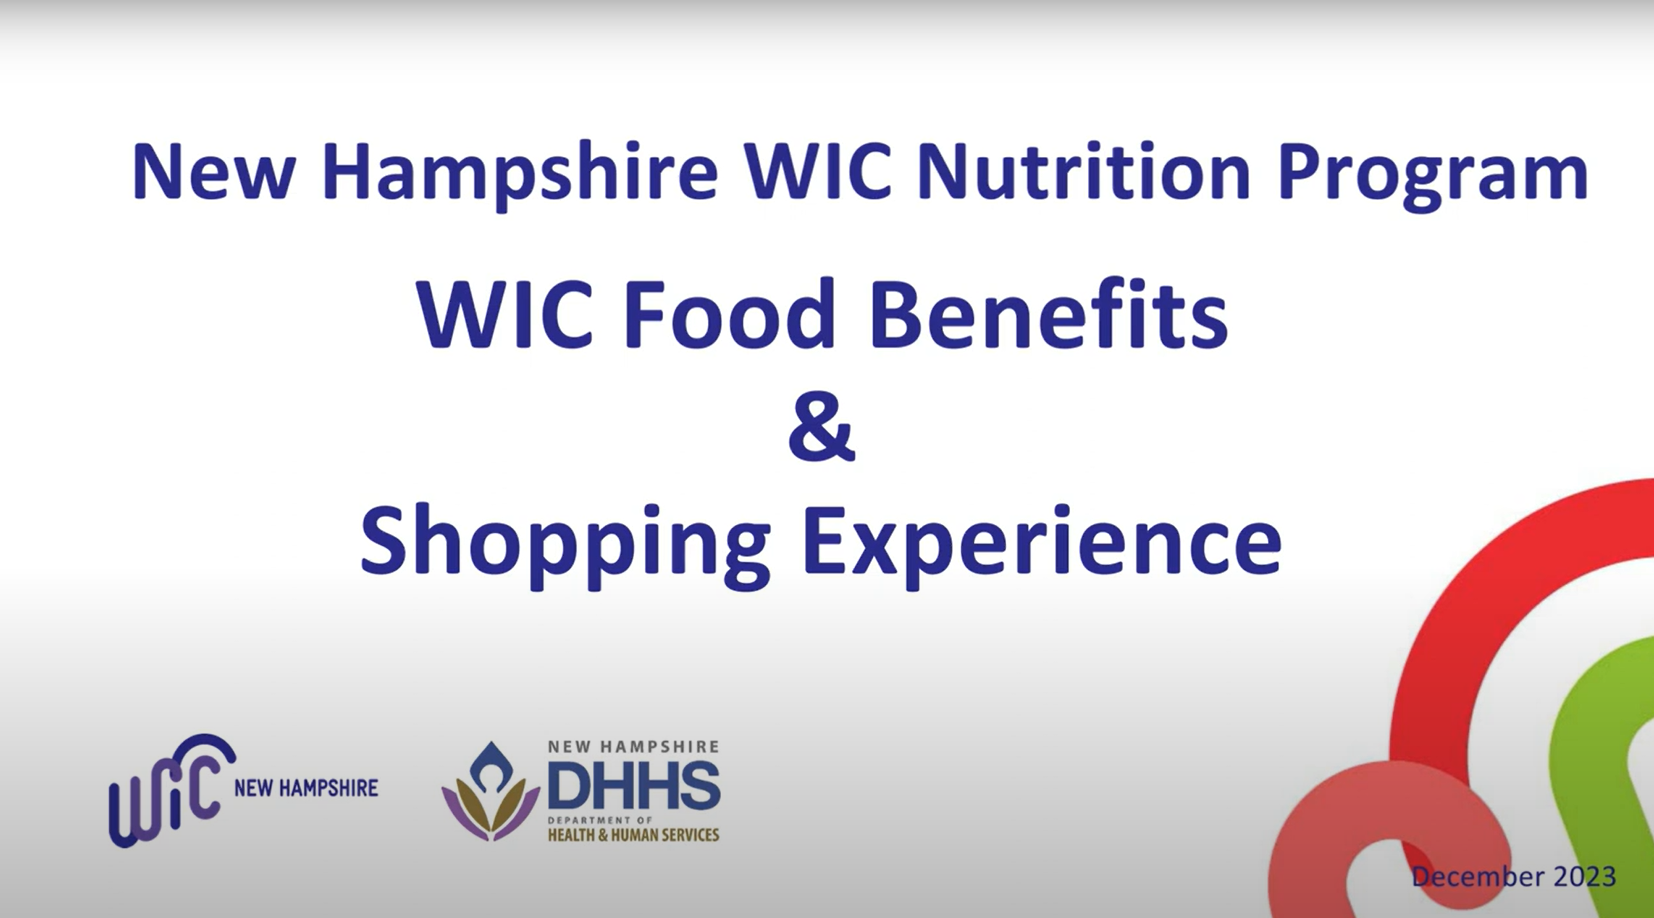 WIC Food Benefits & Shopping Experience